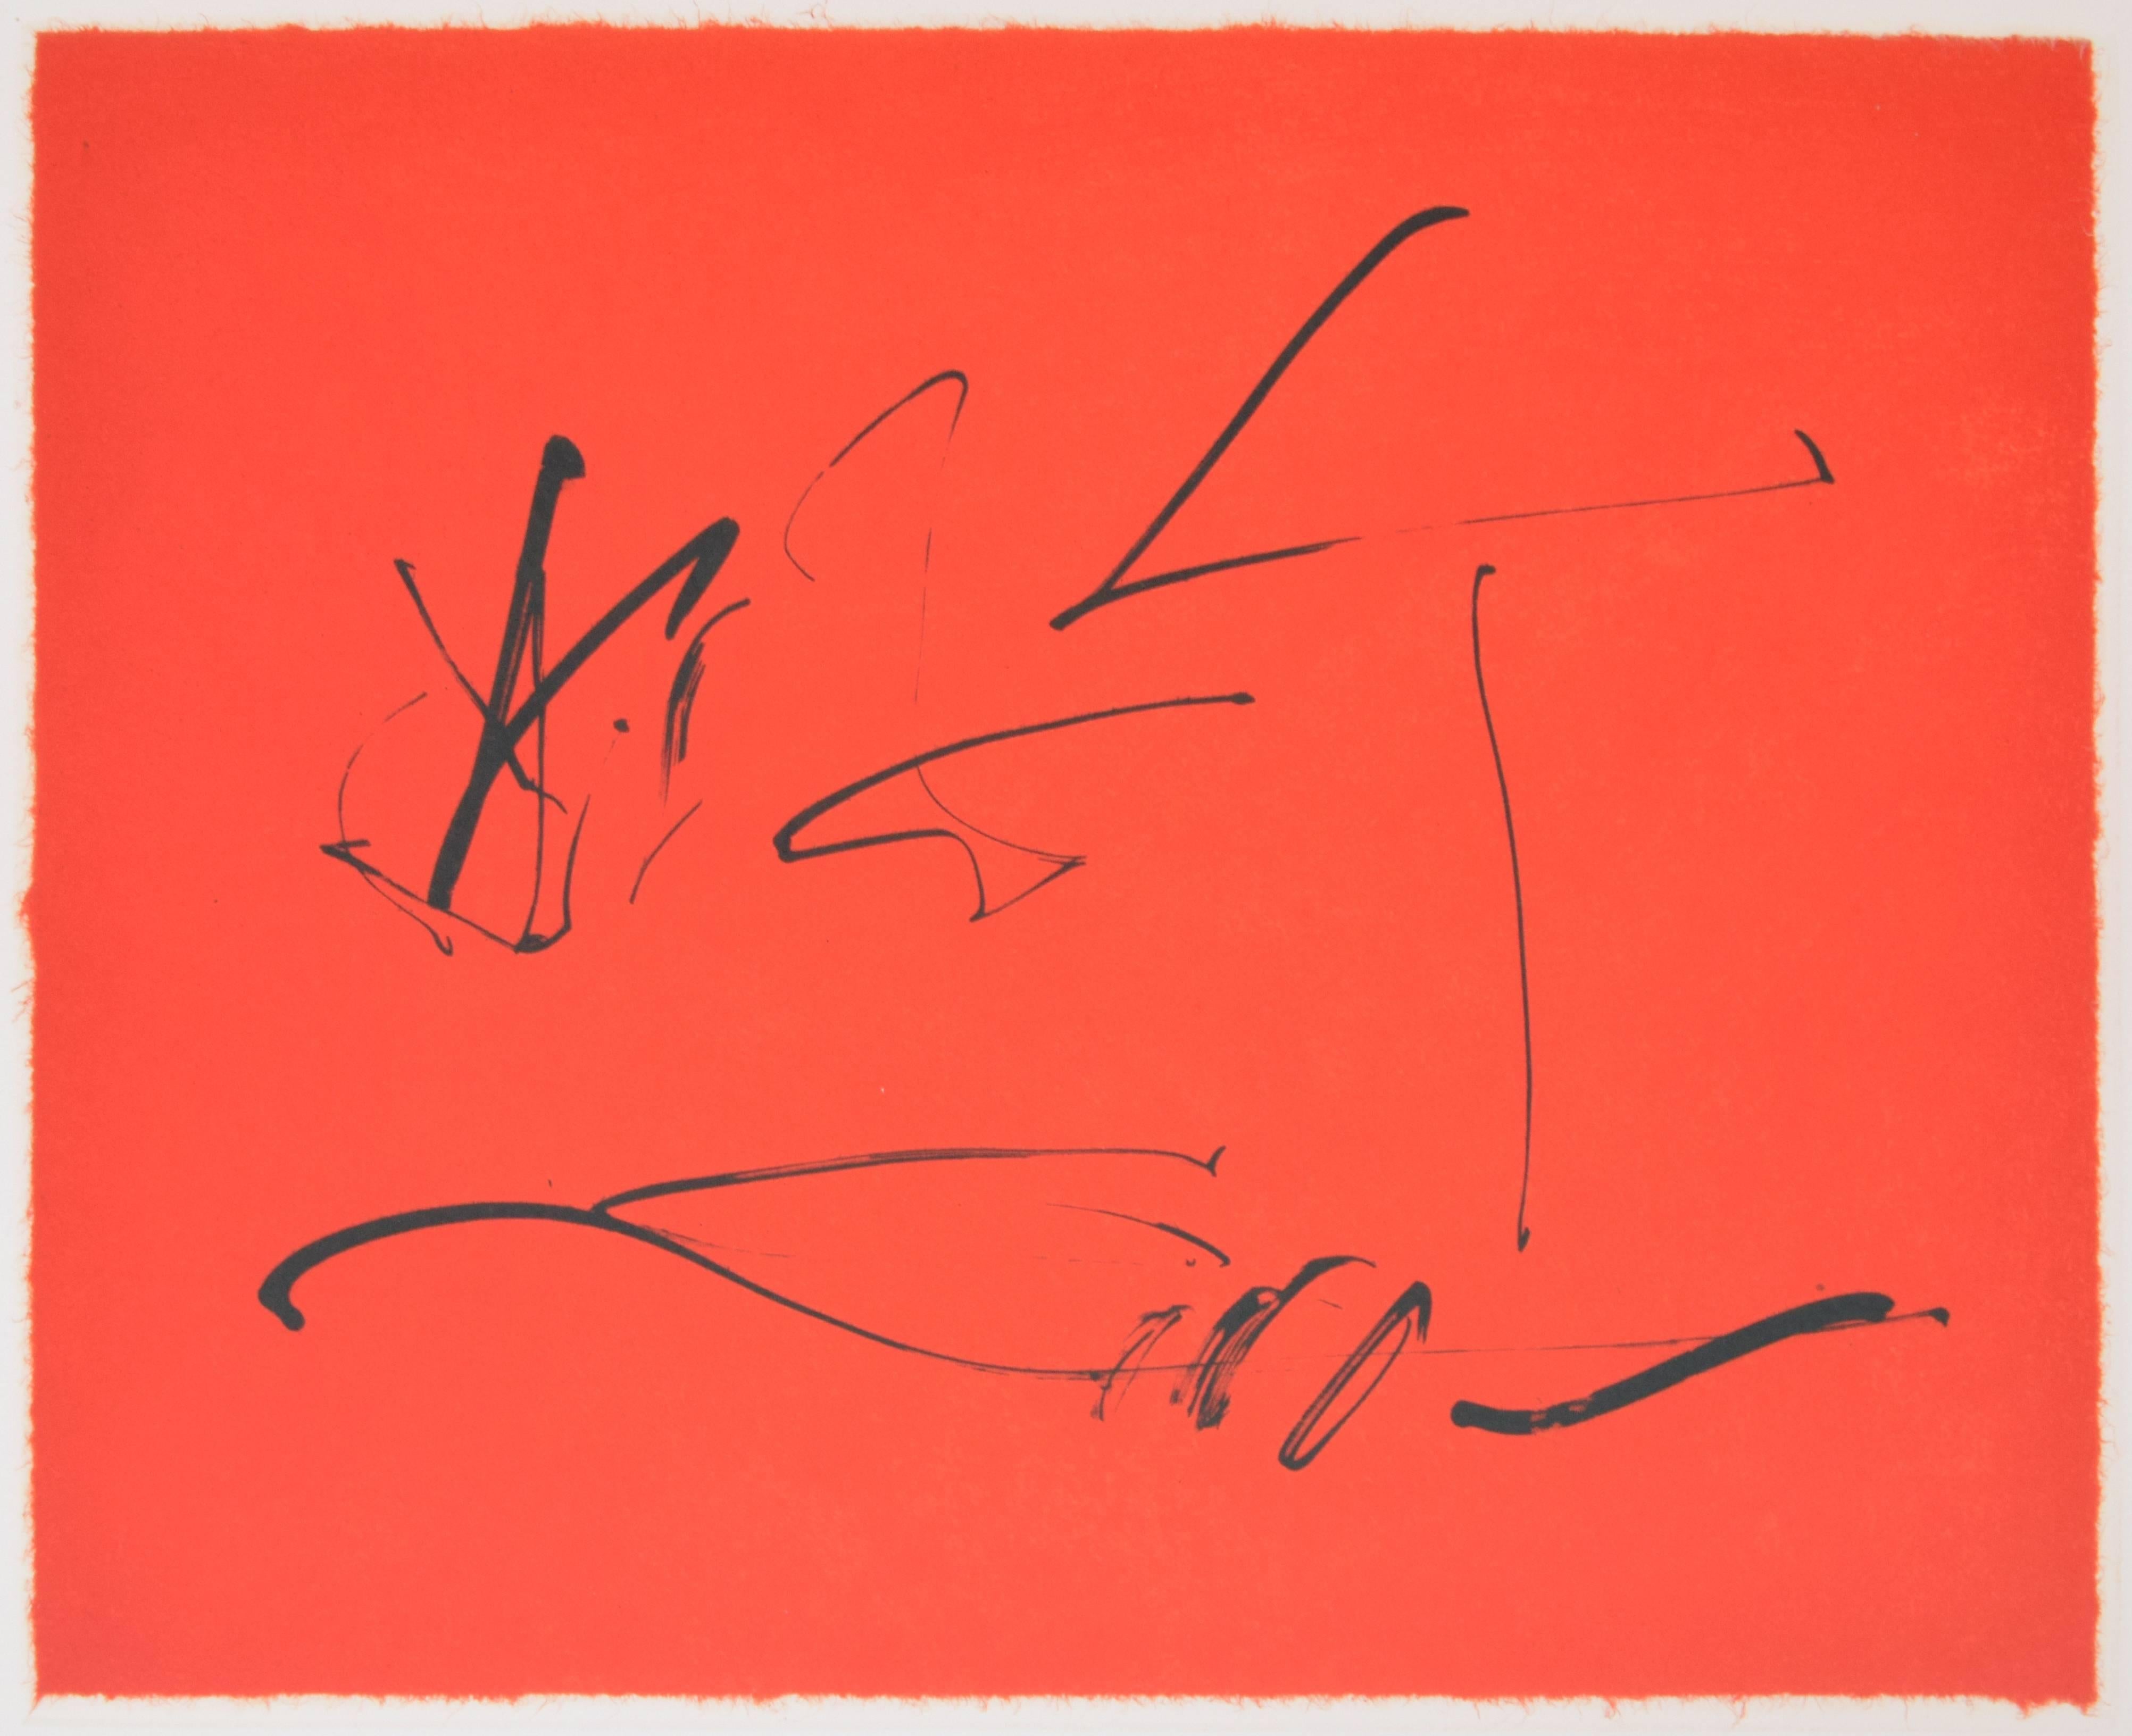 Lithograph titled THREE POEMS: RED WIND by Robert Burns Motherwell (American, 1915-1991). Work is signed and edition 45 of 50. References: The Prints of Robert Motherwell- Catalogue Raisonne 1943-1990, Stephanie Terenzio & Dorothy Belknap, pg.